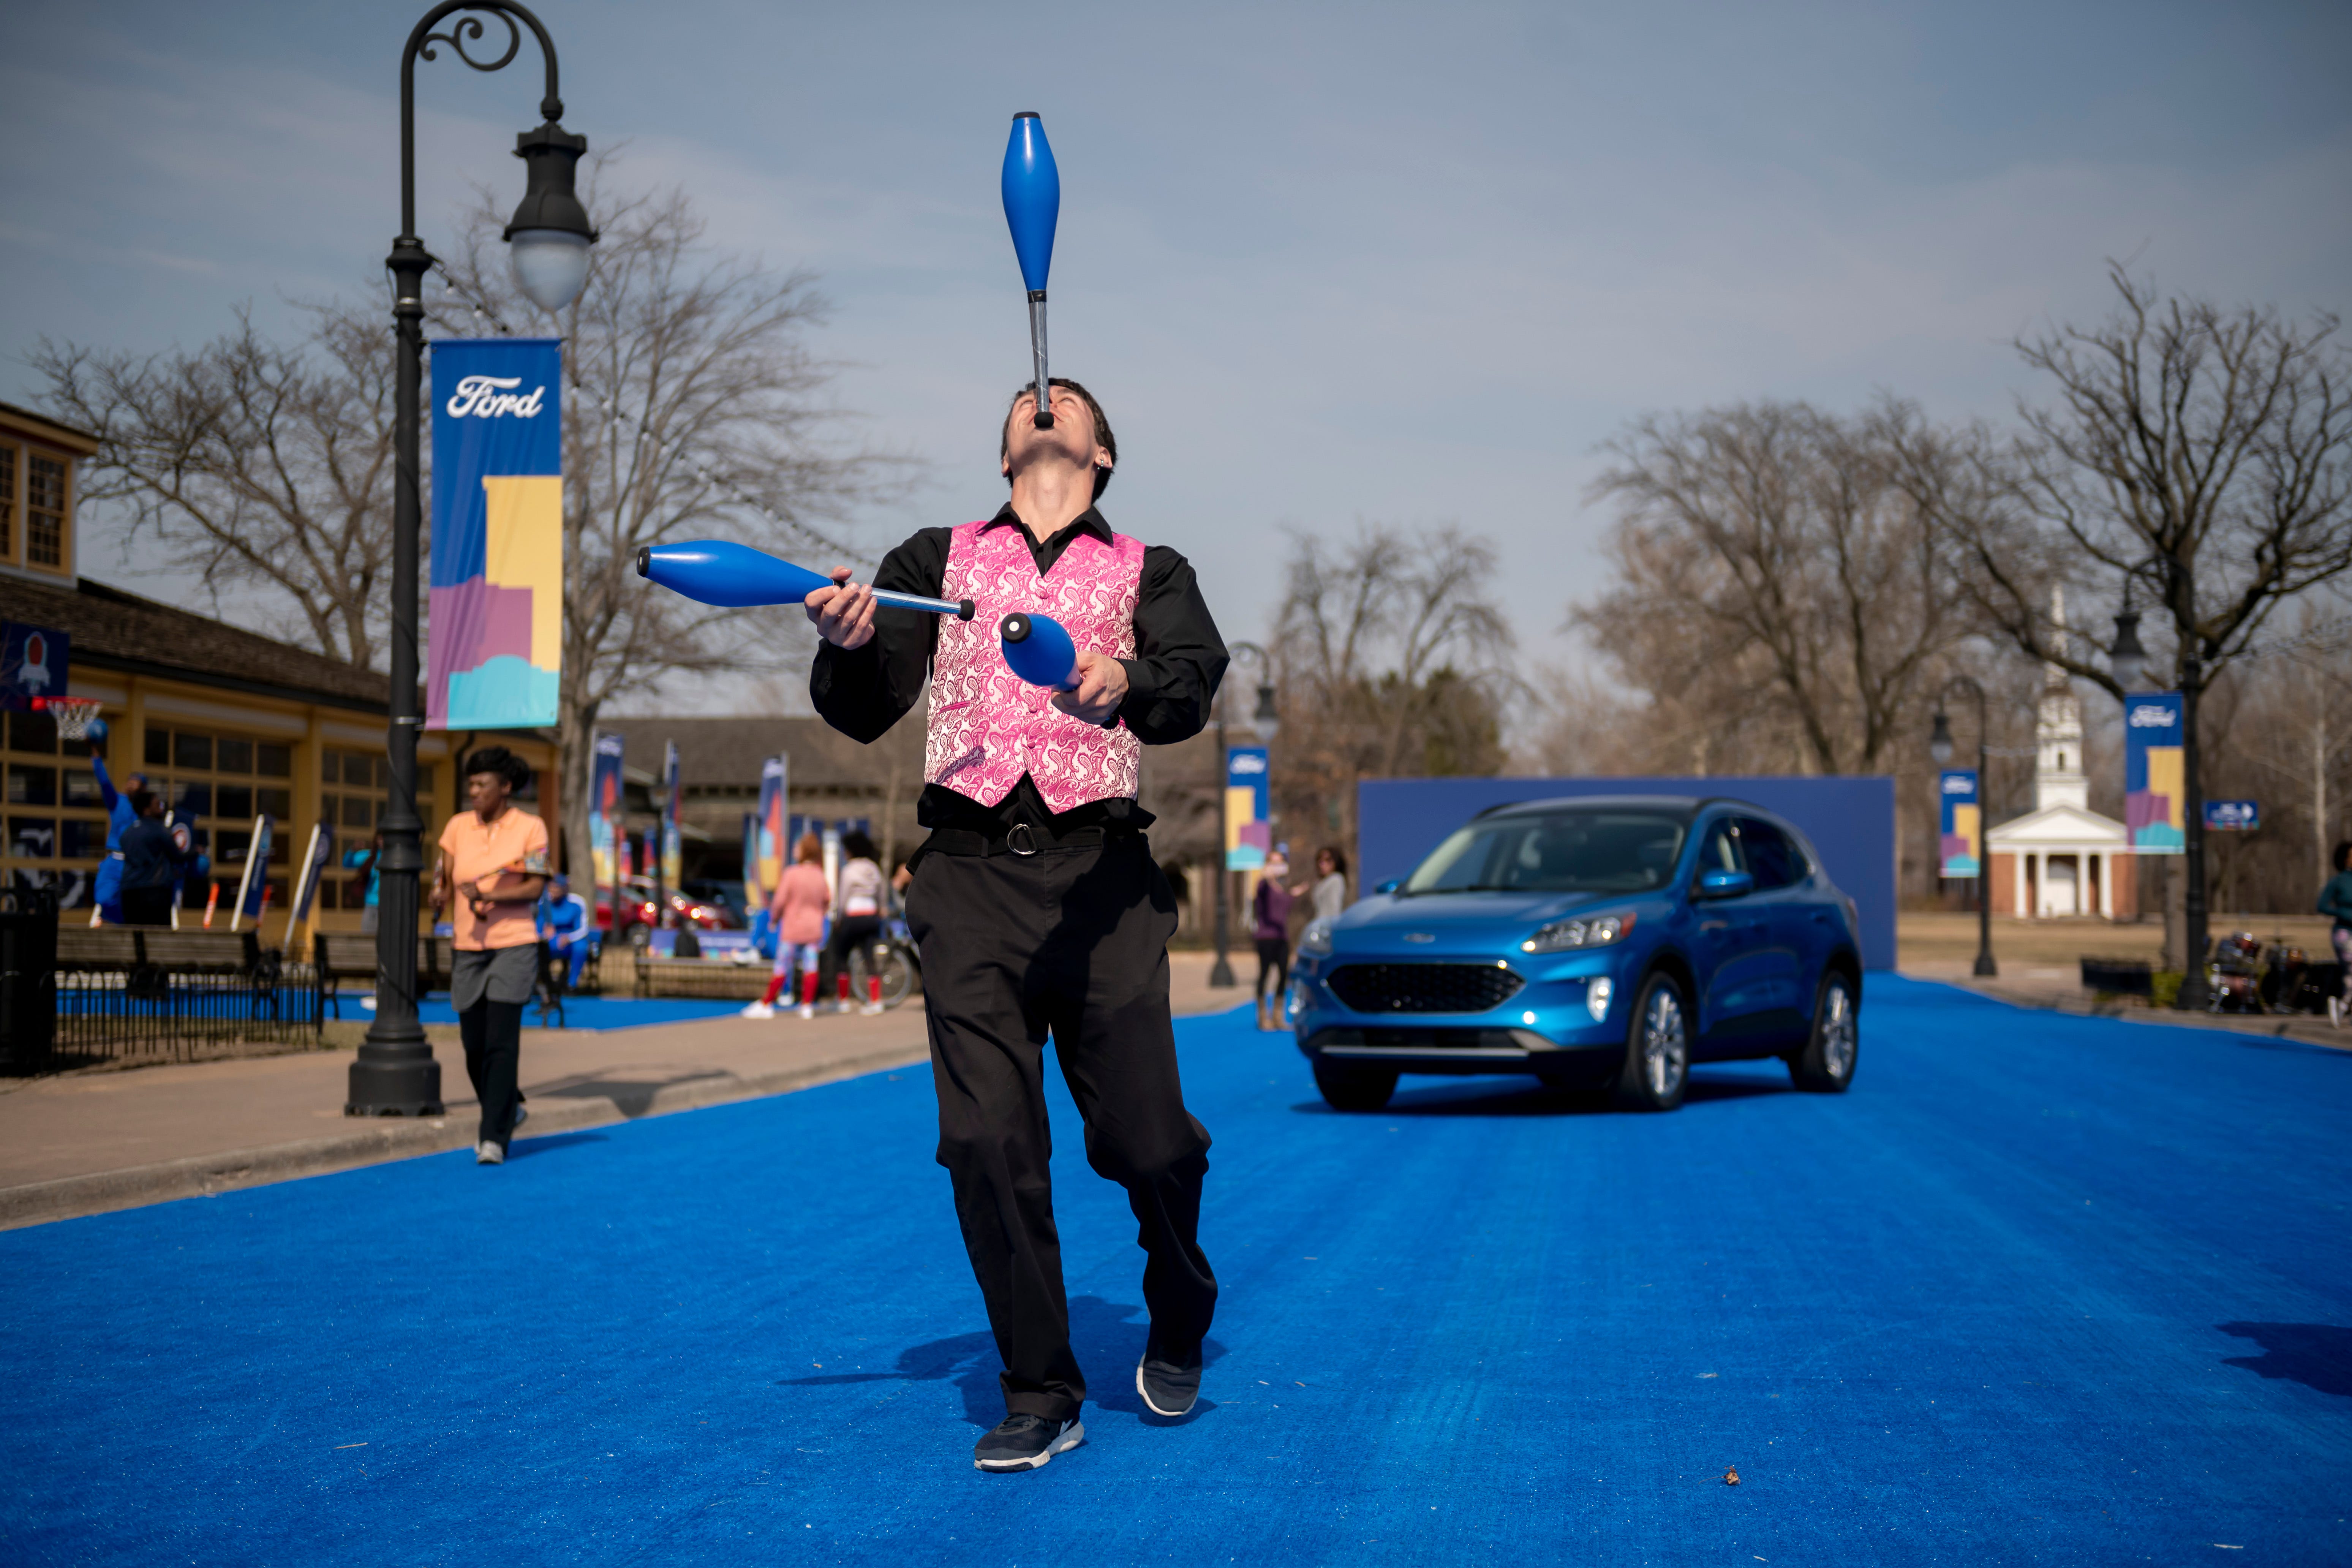 Professional juggler Chuck Clark performs during a reveal of the 2020 Ford Escape, at Greenfield Village.